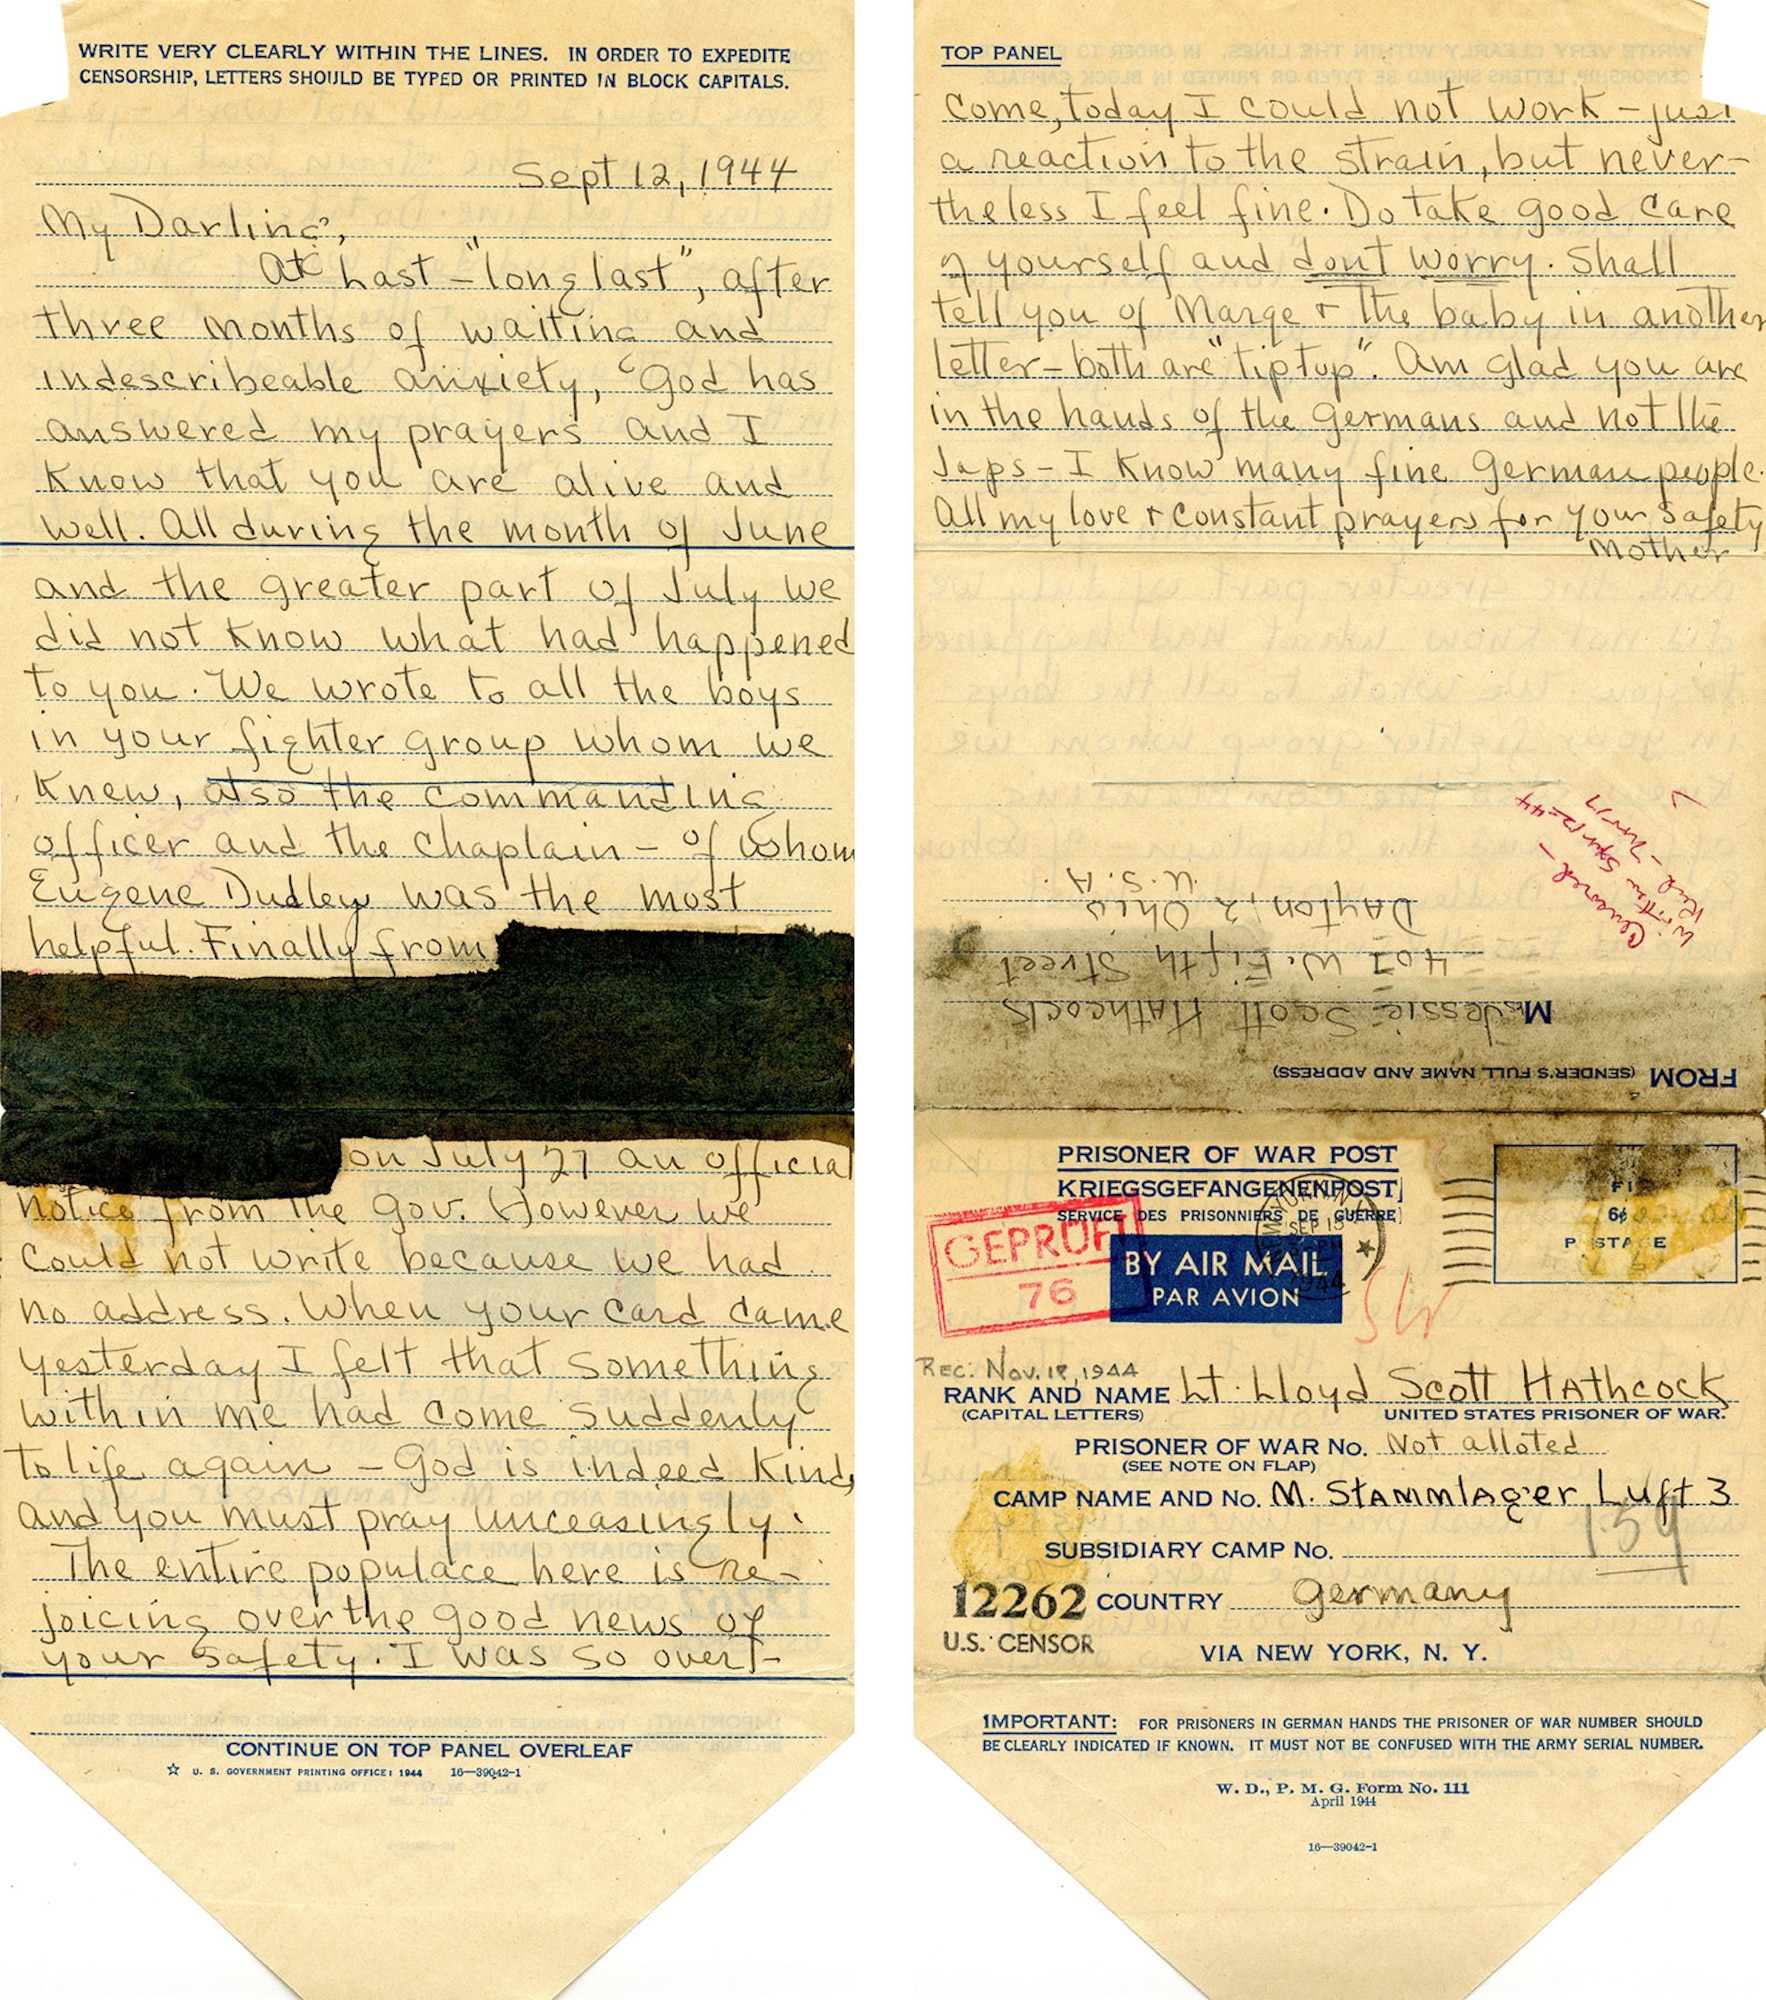 Prisoner of War letter from Lt. Lloyd "Scotty" Hathcock's mother. Notice the information blacked out by the wartime censor. (U.S. Air Force photo)